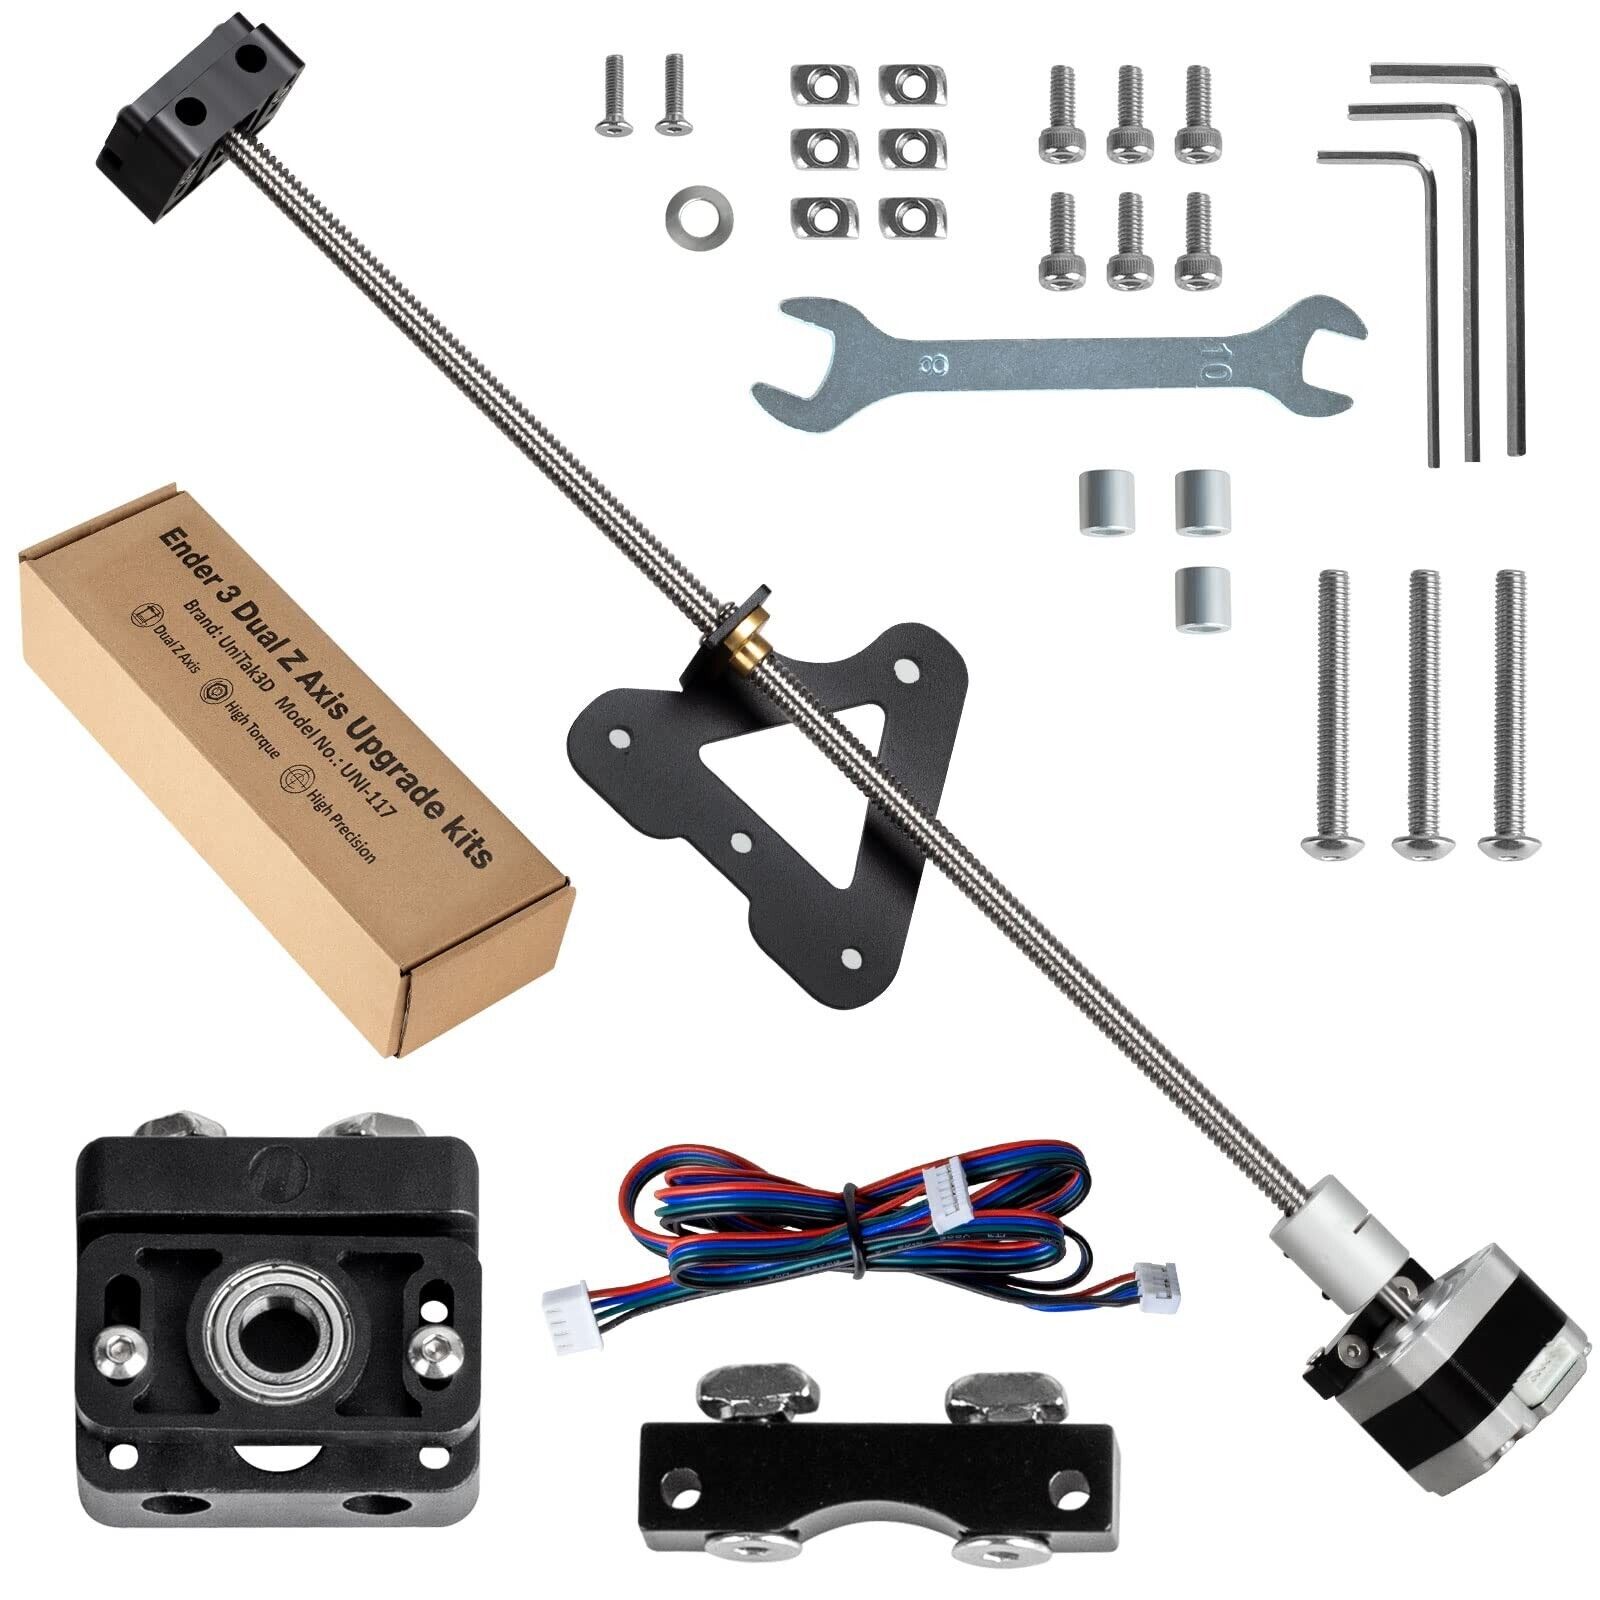 UniTak3D Ender 3 Dual Z Axis Upgrade Kit with T8 Lead Screw and High Torque N...